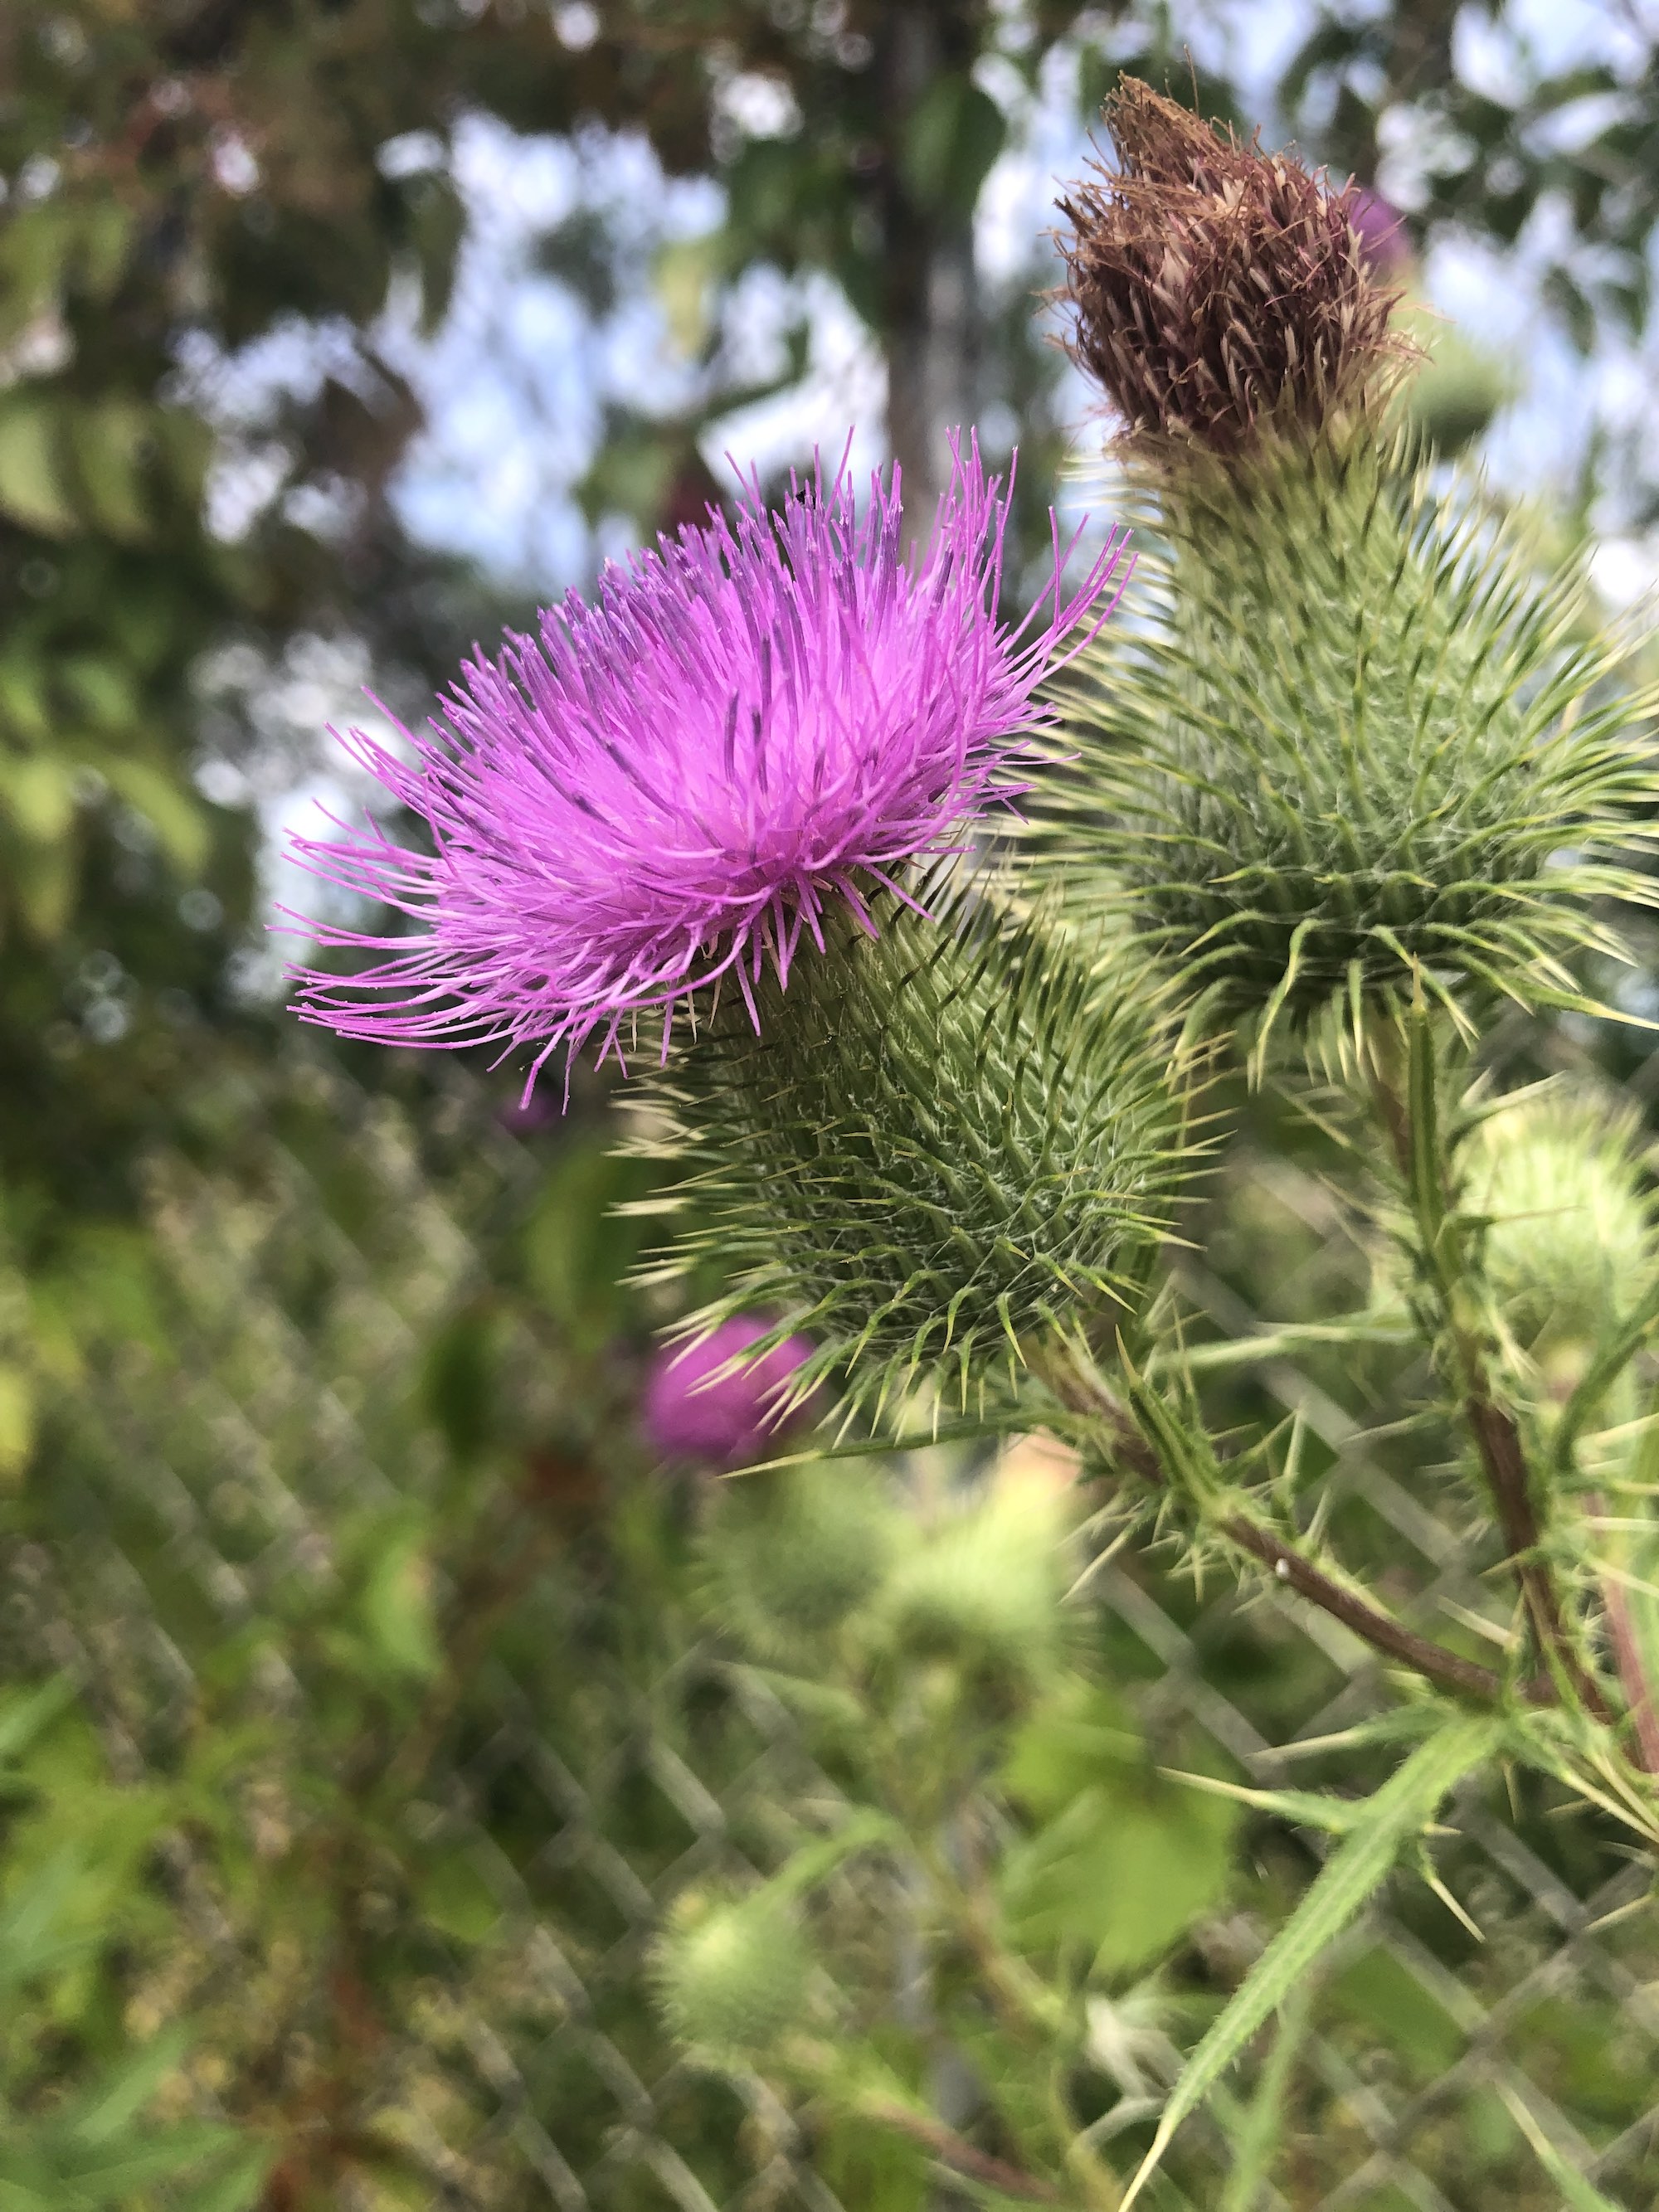 Bull Thistle along shore of Lake Wingra in Vilas Park in Madison, Wisconsin on August 15, 2022.